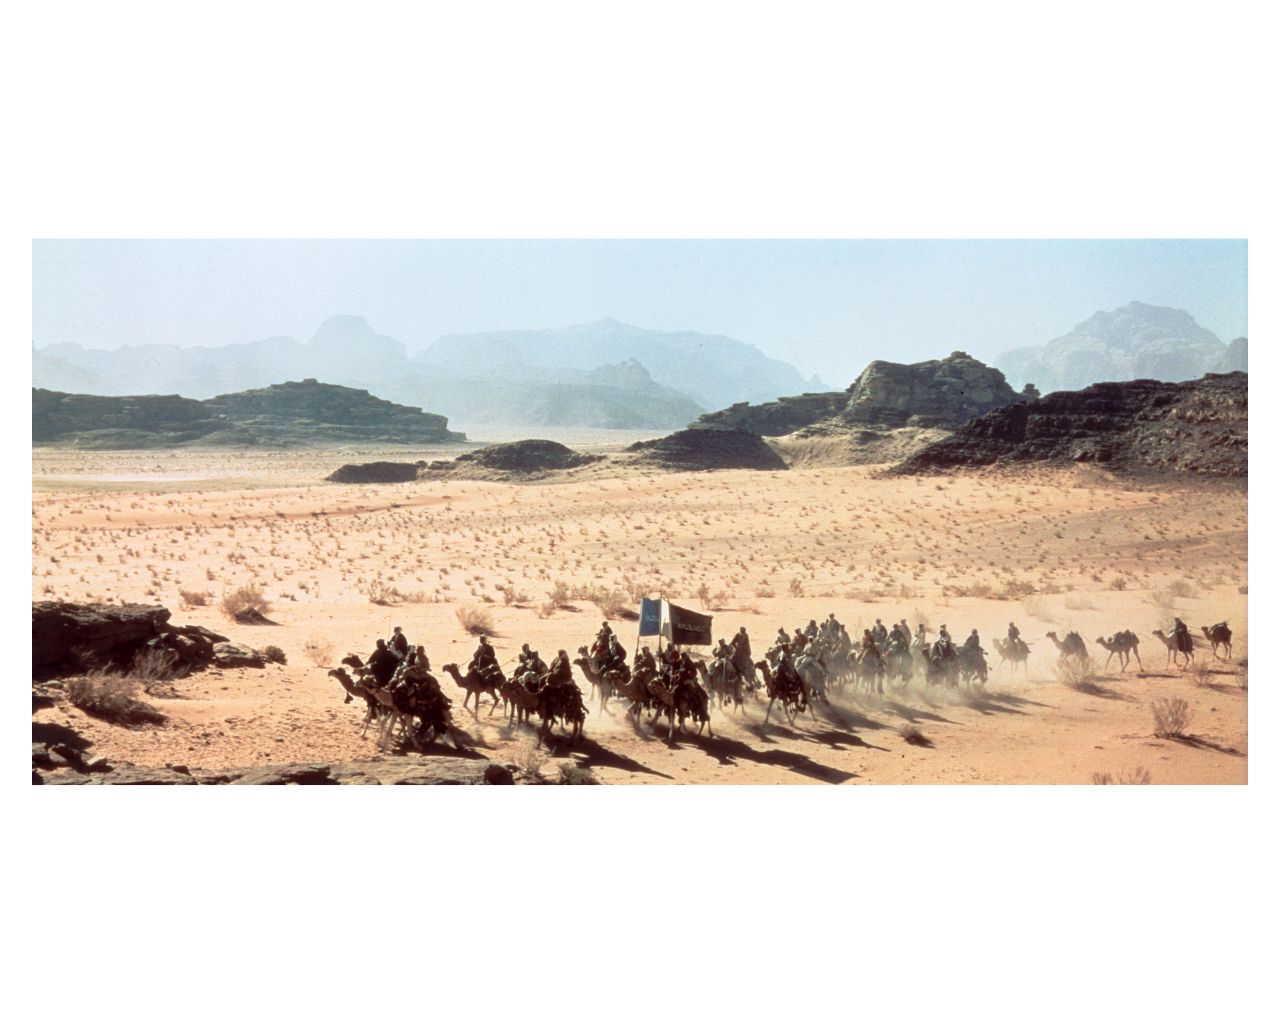 Jordan's desert vistas feature prominently in David Lean's epic "Lawrence of Arabia" -- which celebrates its 50th anniversary this year.